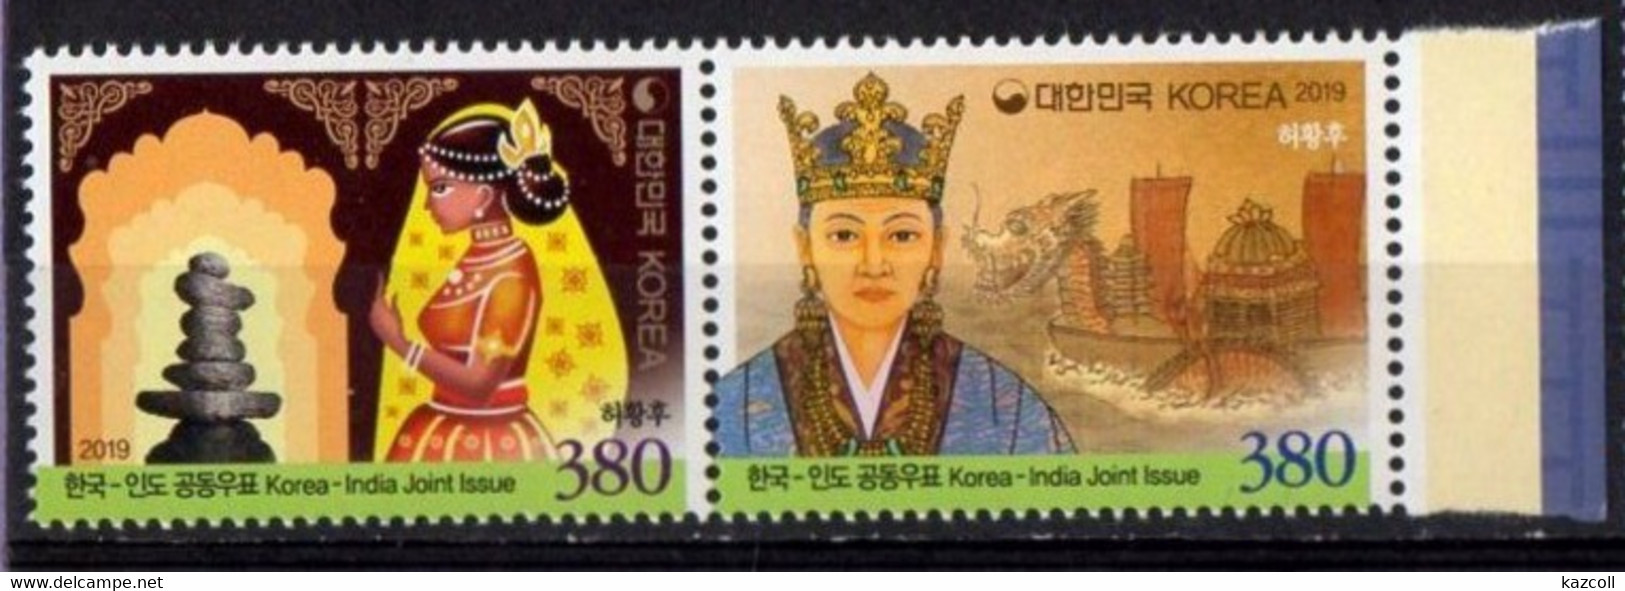 Korea, South 2019.  Queen Heo, Indian-born Korean Queen - Joint Issue With India. MNH - Corea Del Sur